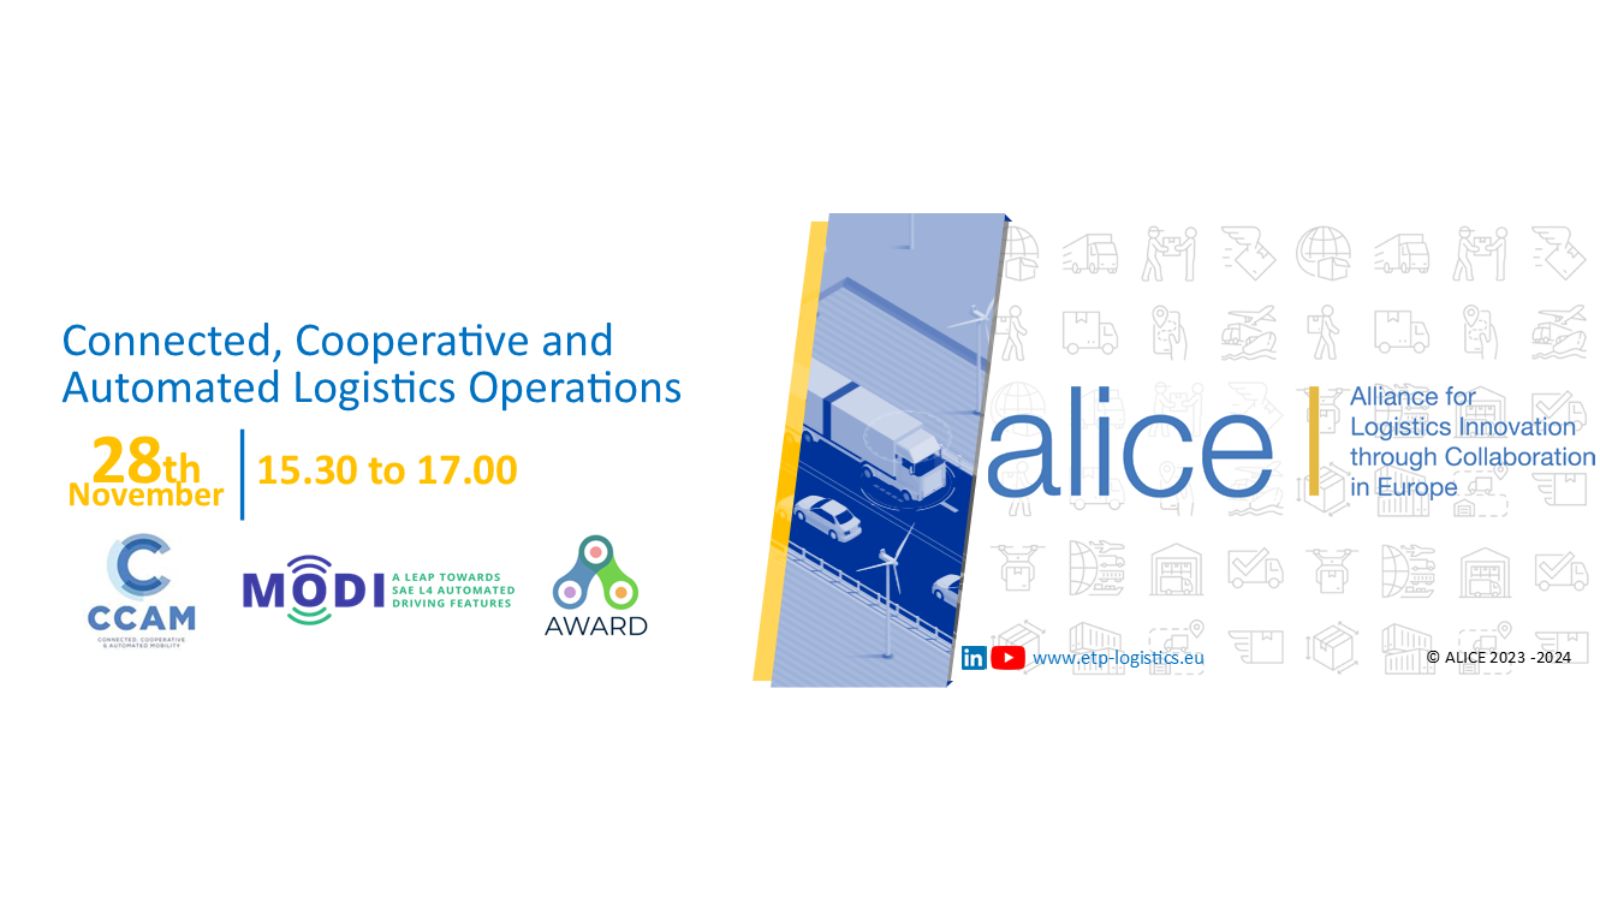 Connected, Cooperative and Automated Logistics Operations Activity Field banner